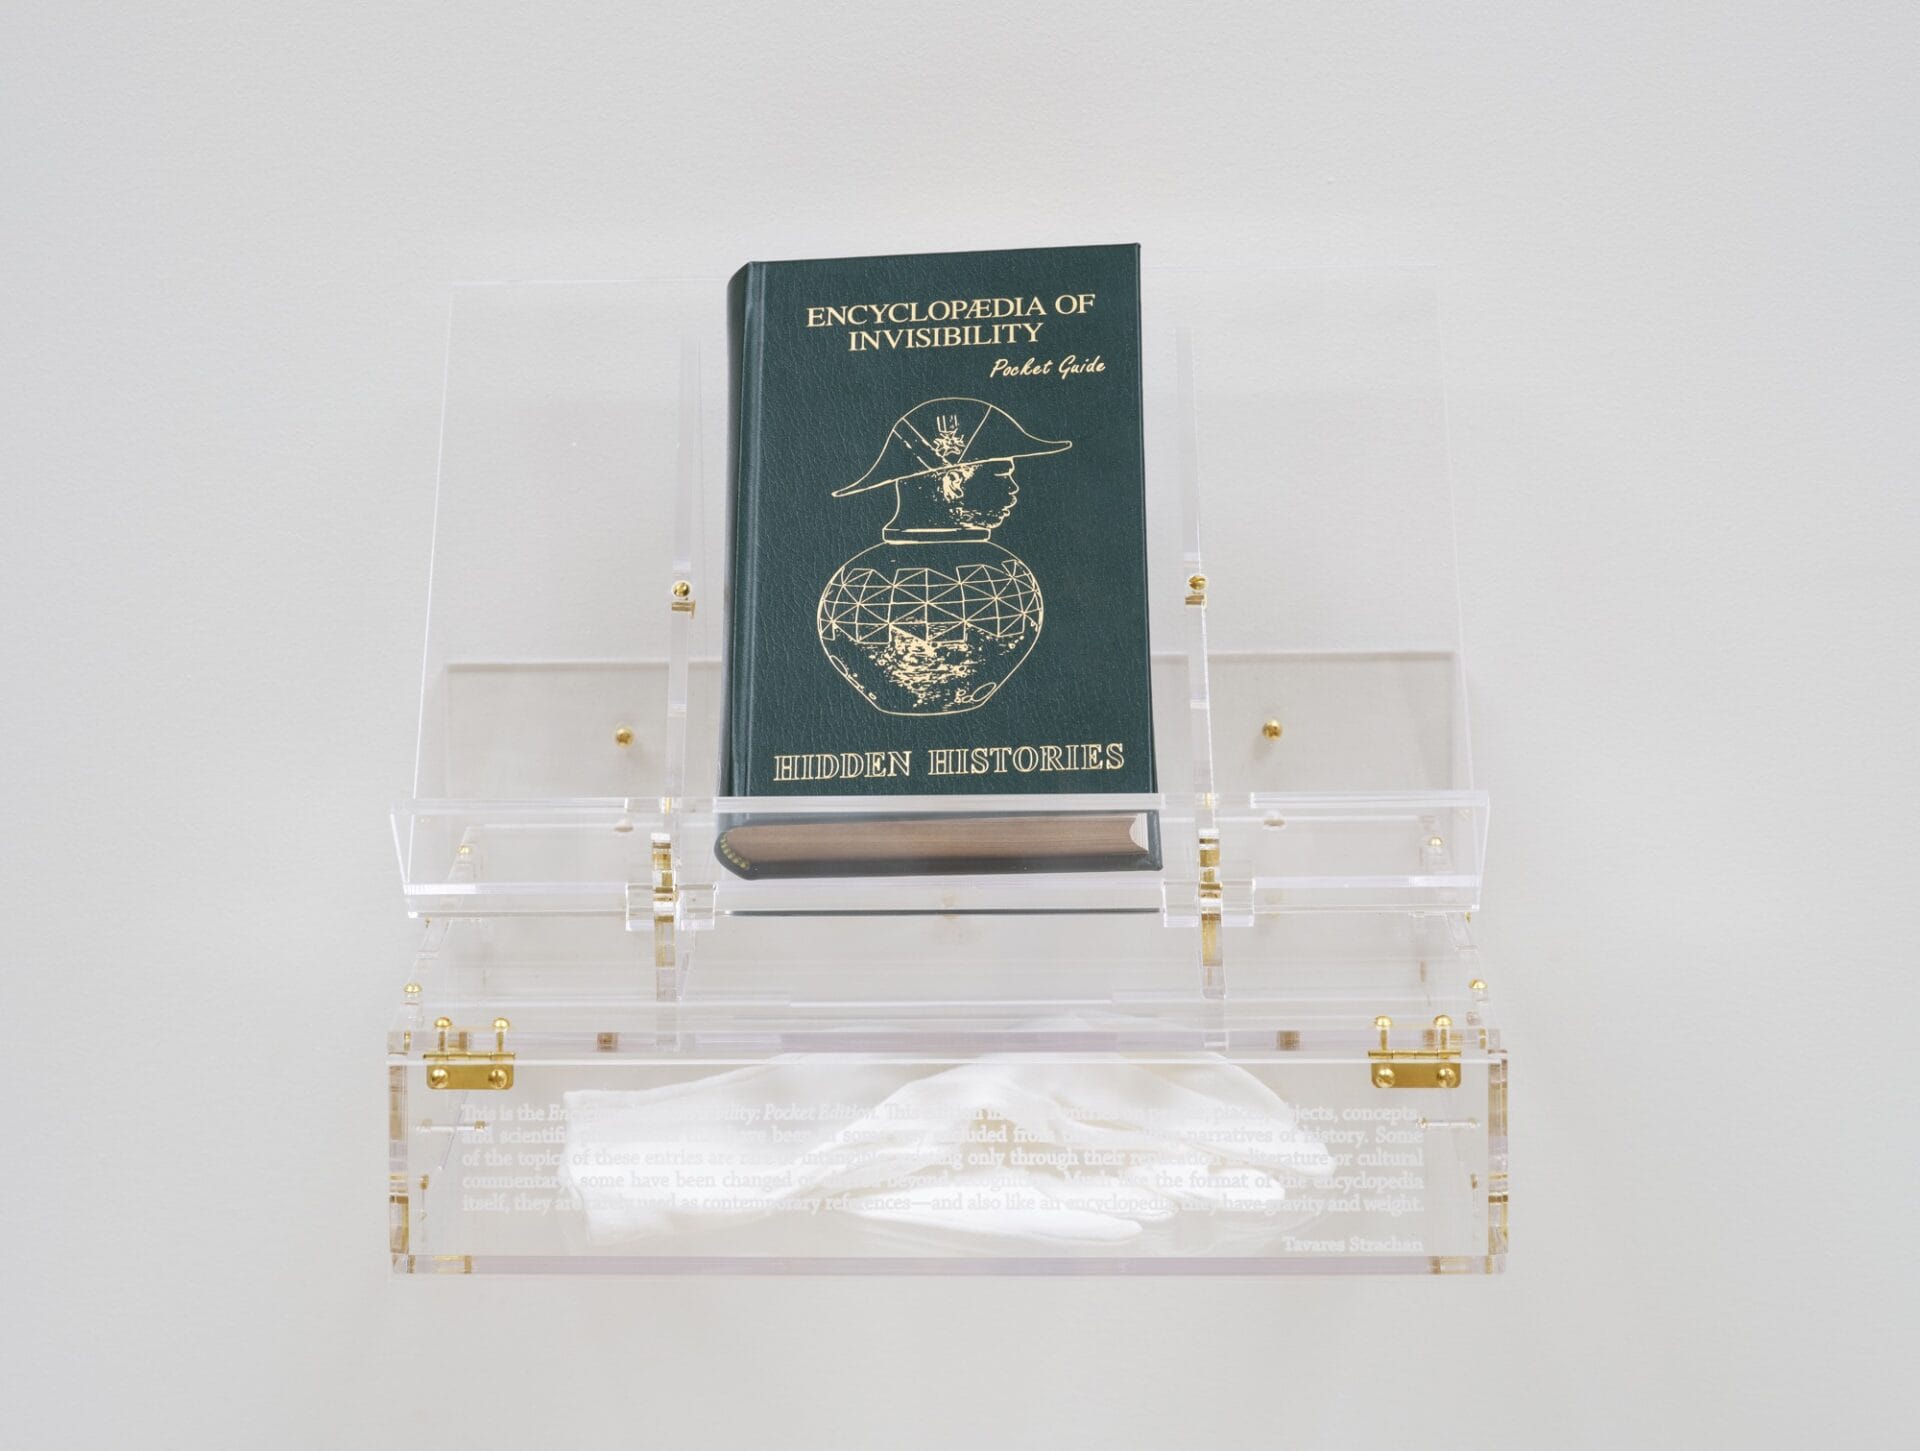 a sculpture of a pocket-size book called the Encyclopedia of Invisibility: Hidden Histories, displayed on an acrylic stand with white gloves inside